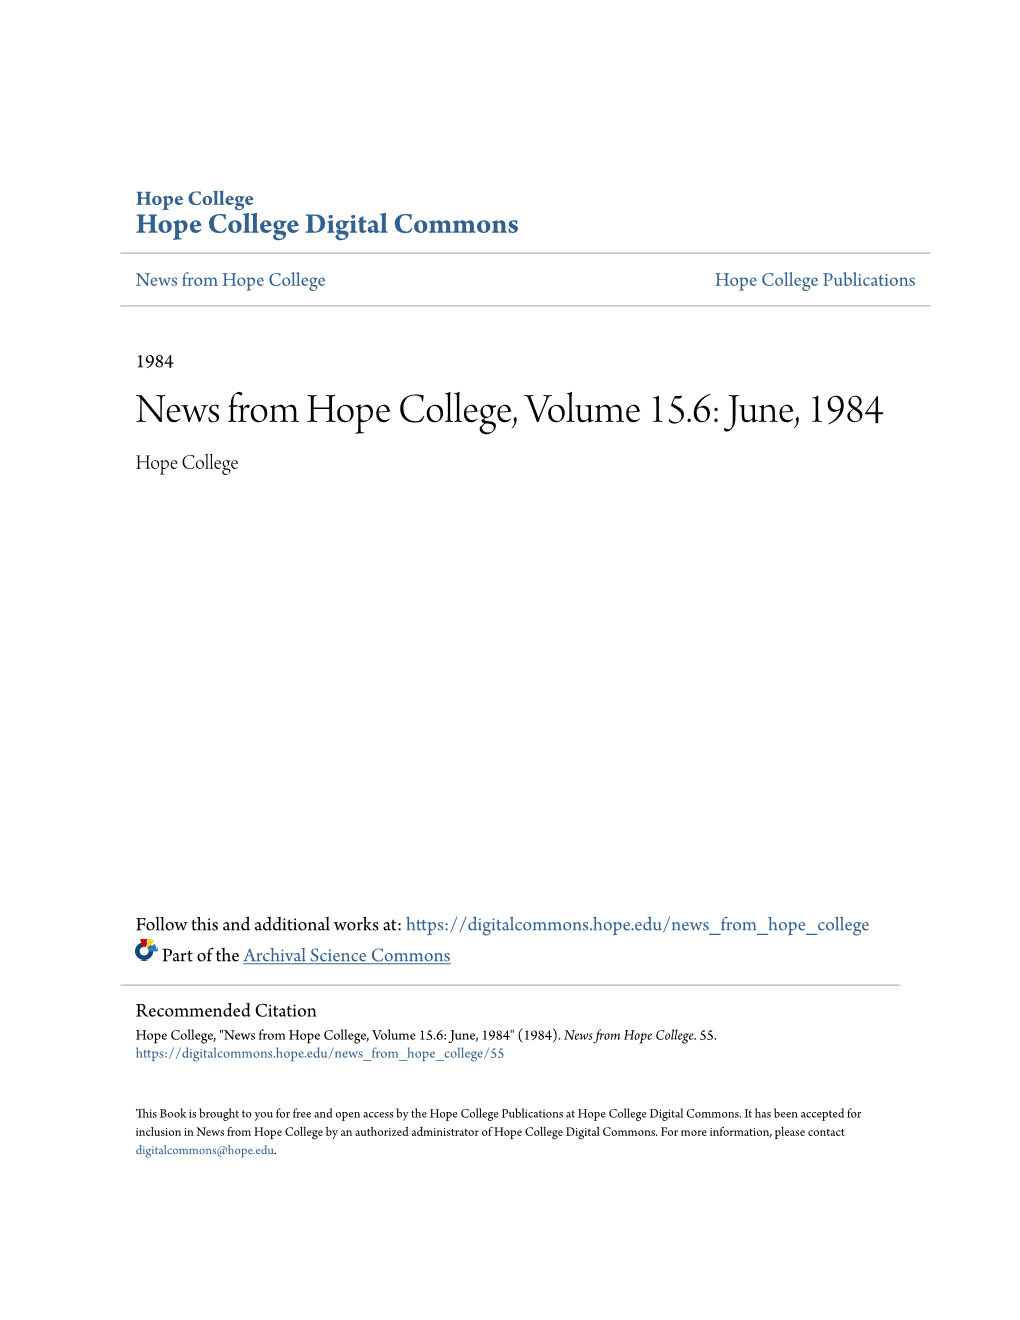 News from Hope College, Volume 15.6: June, 1984 Hope College